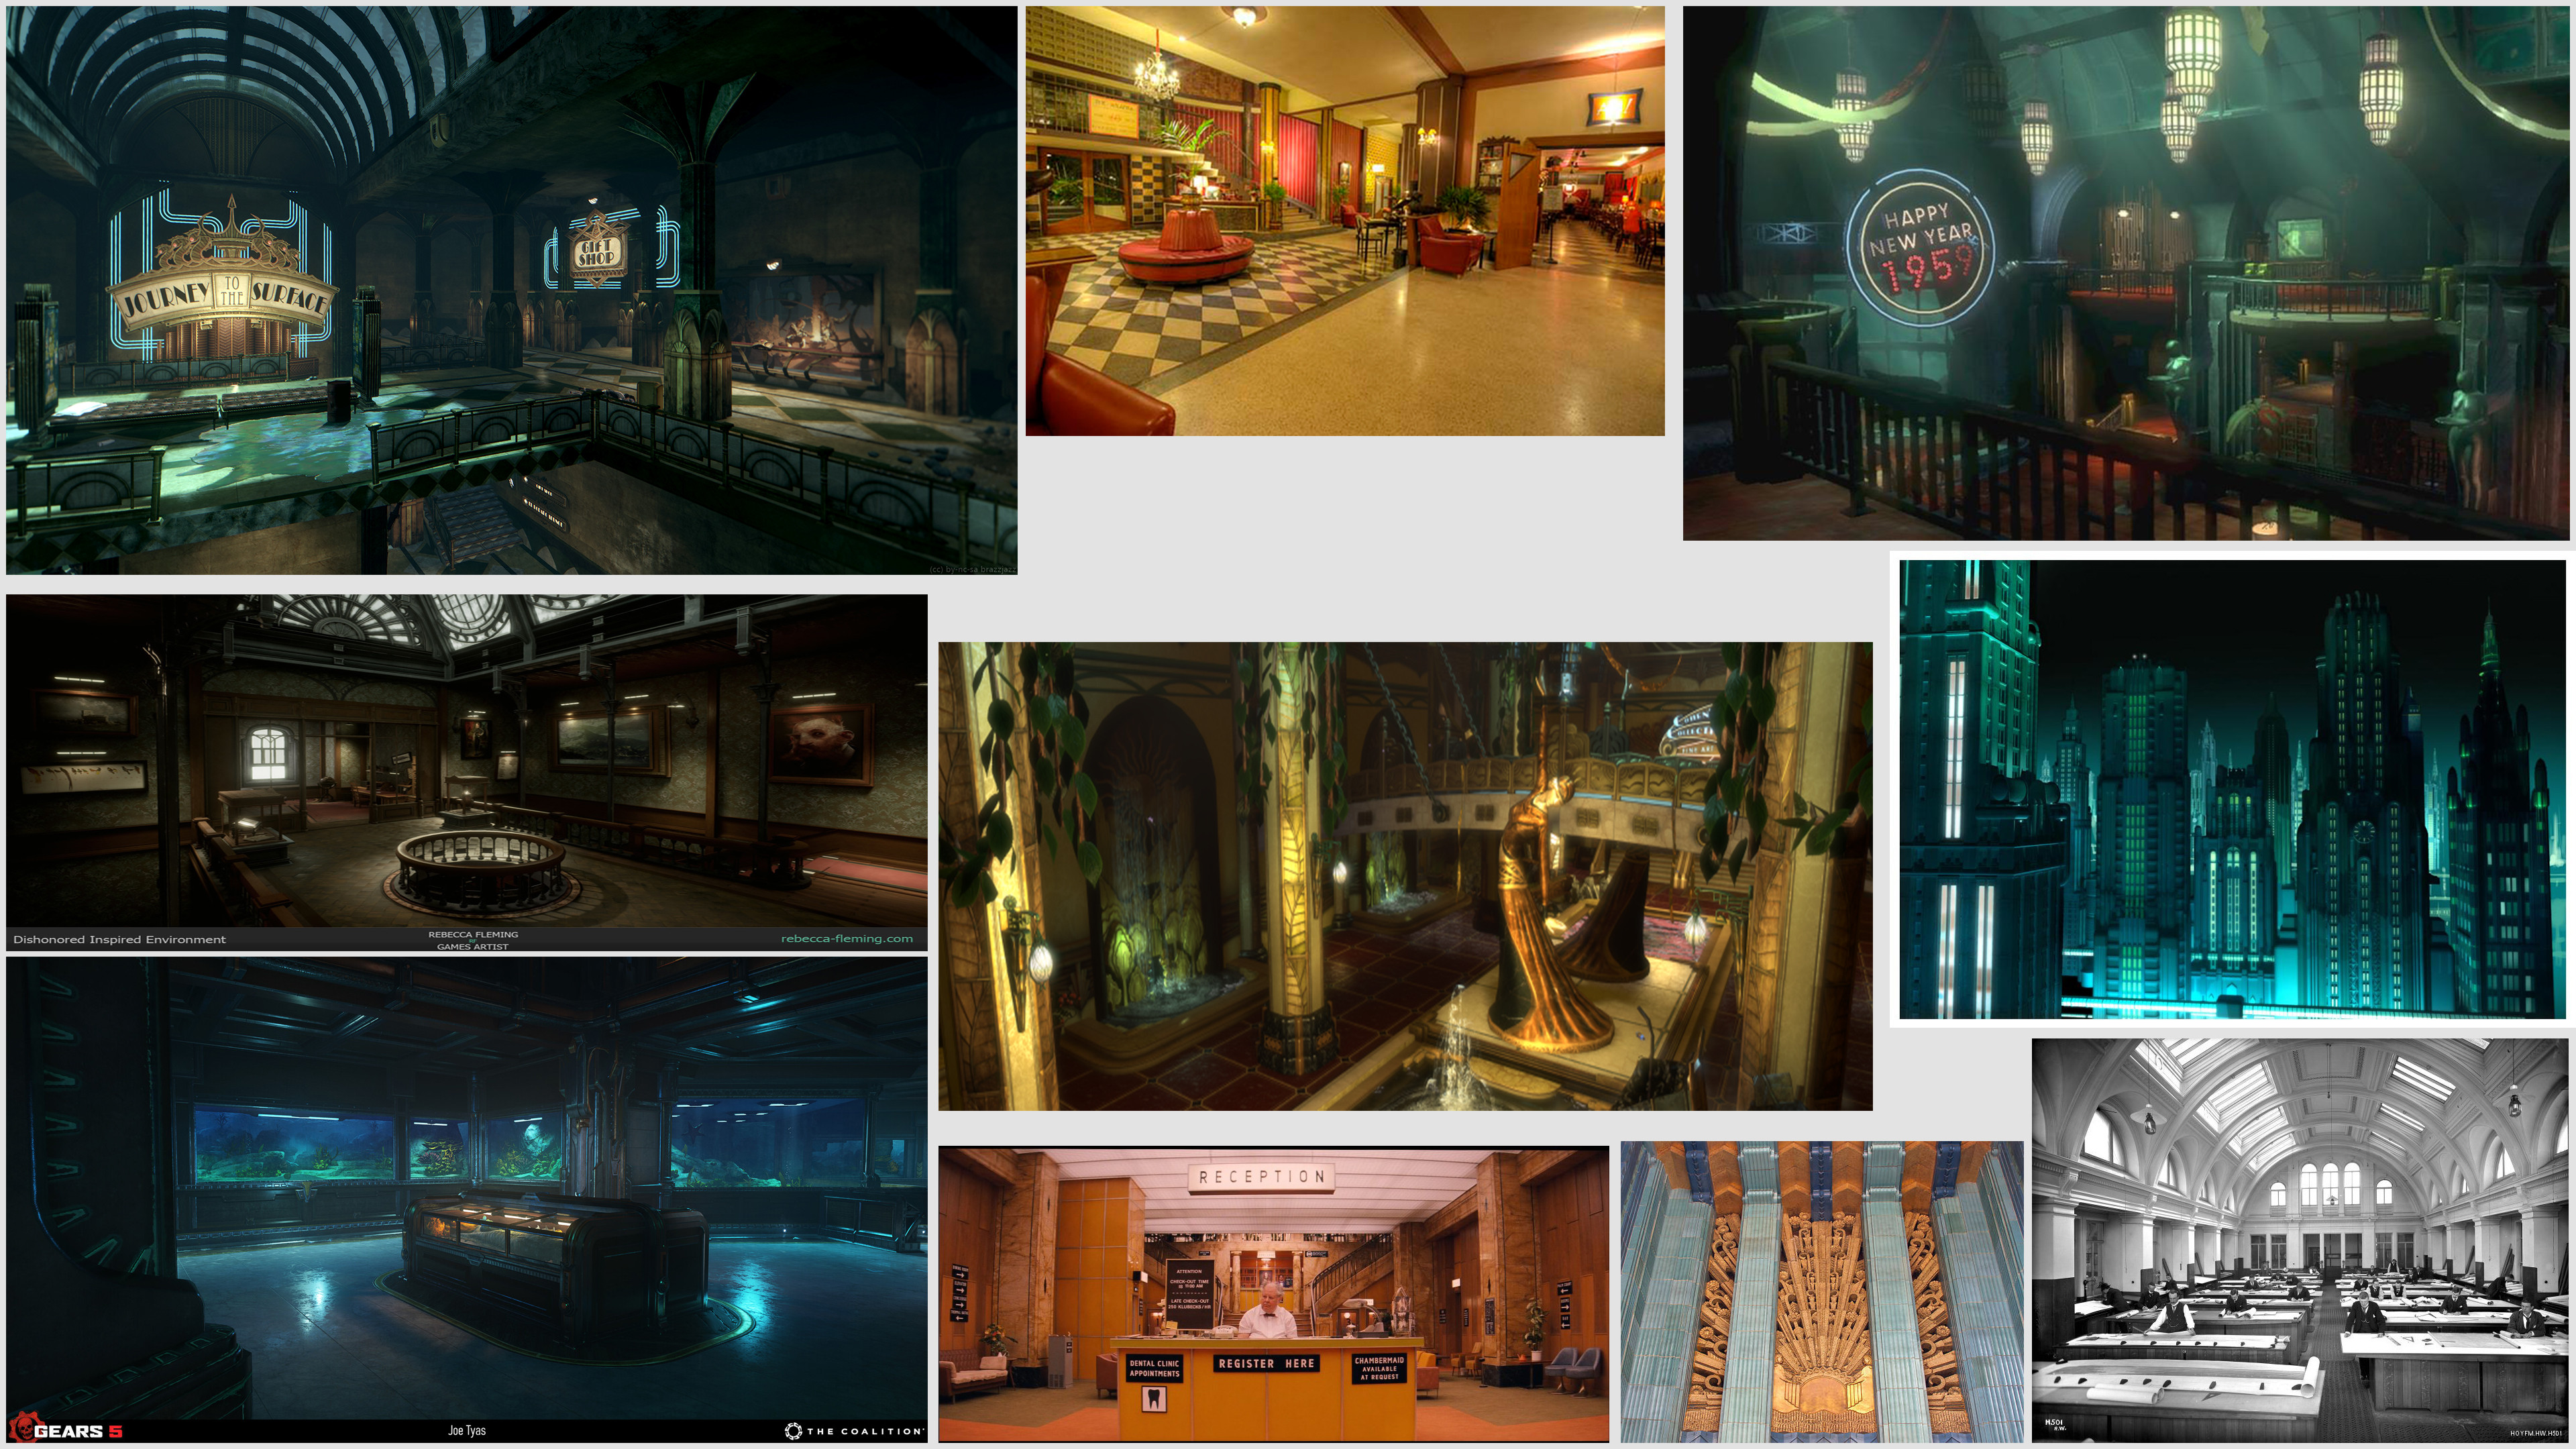 References:
The main inspirations and reference pieces I looked at while building this scene were from Bioshock, Dishonored 1 &amp; 2, and Gears 5. They all fit that same niche of reclaimed beauty with heavy art-deco vibes in their architecture.